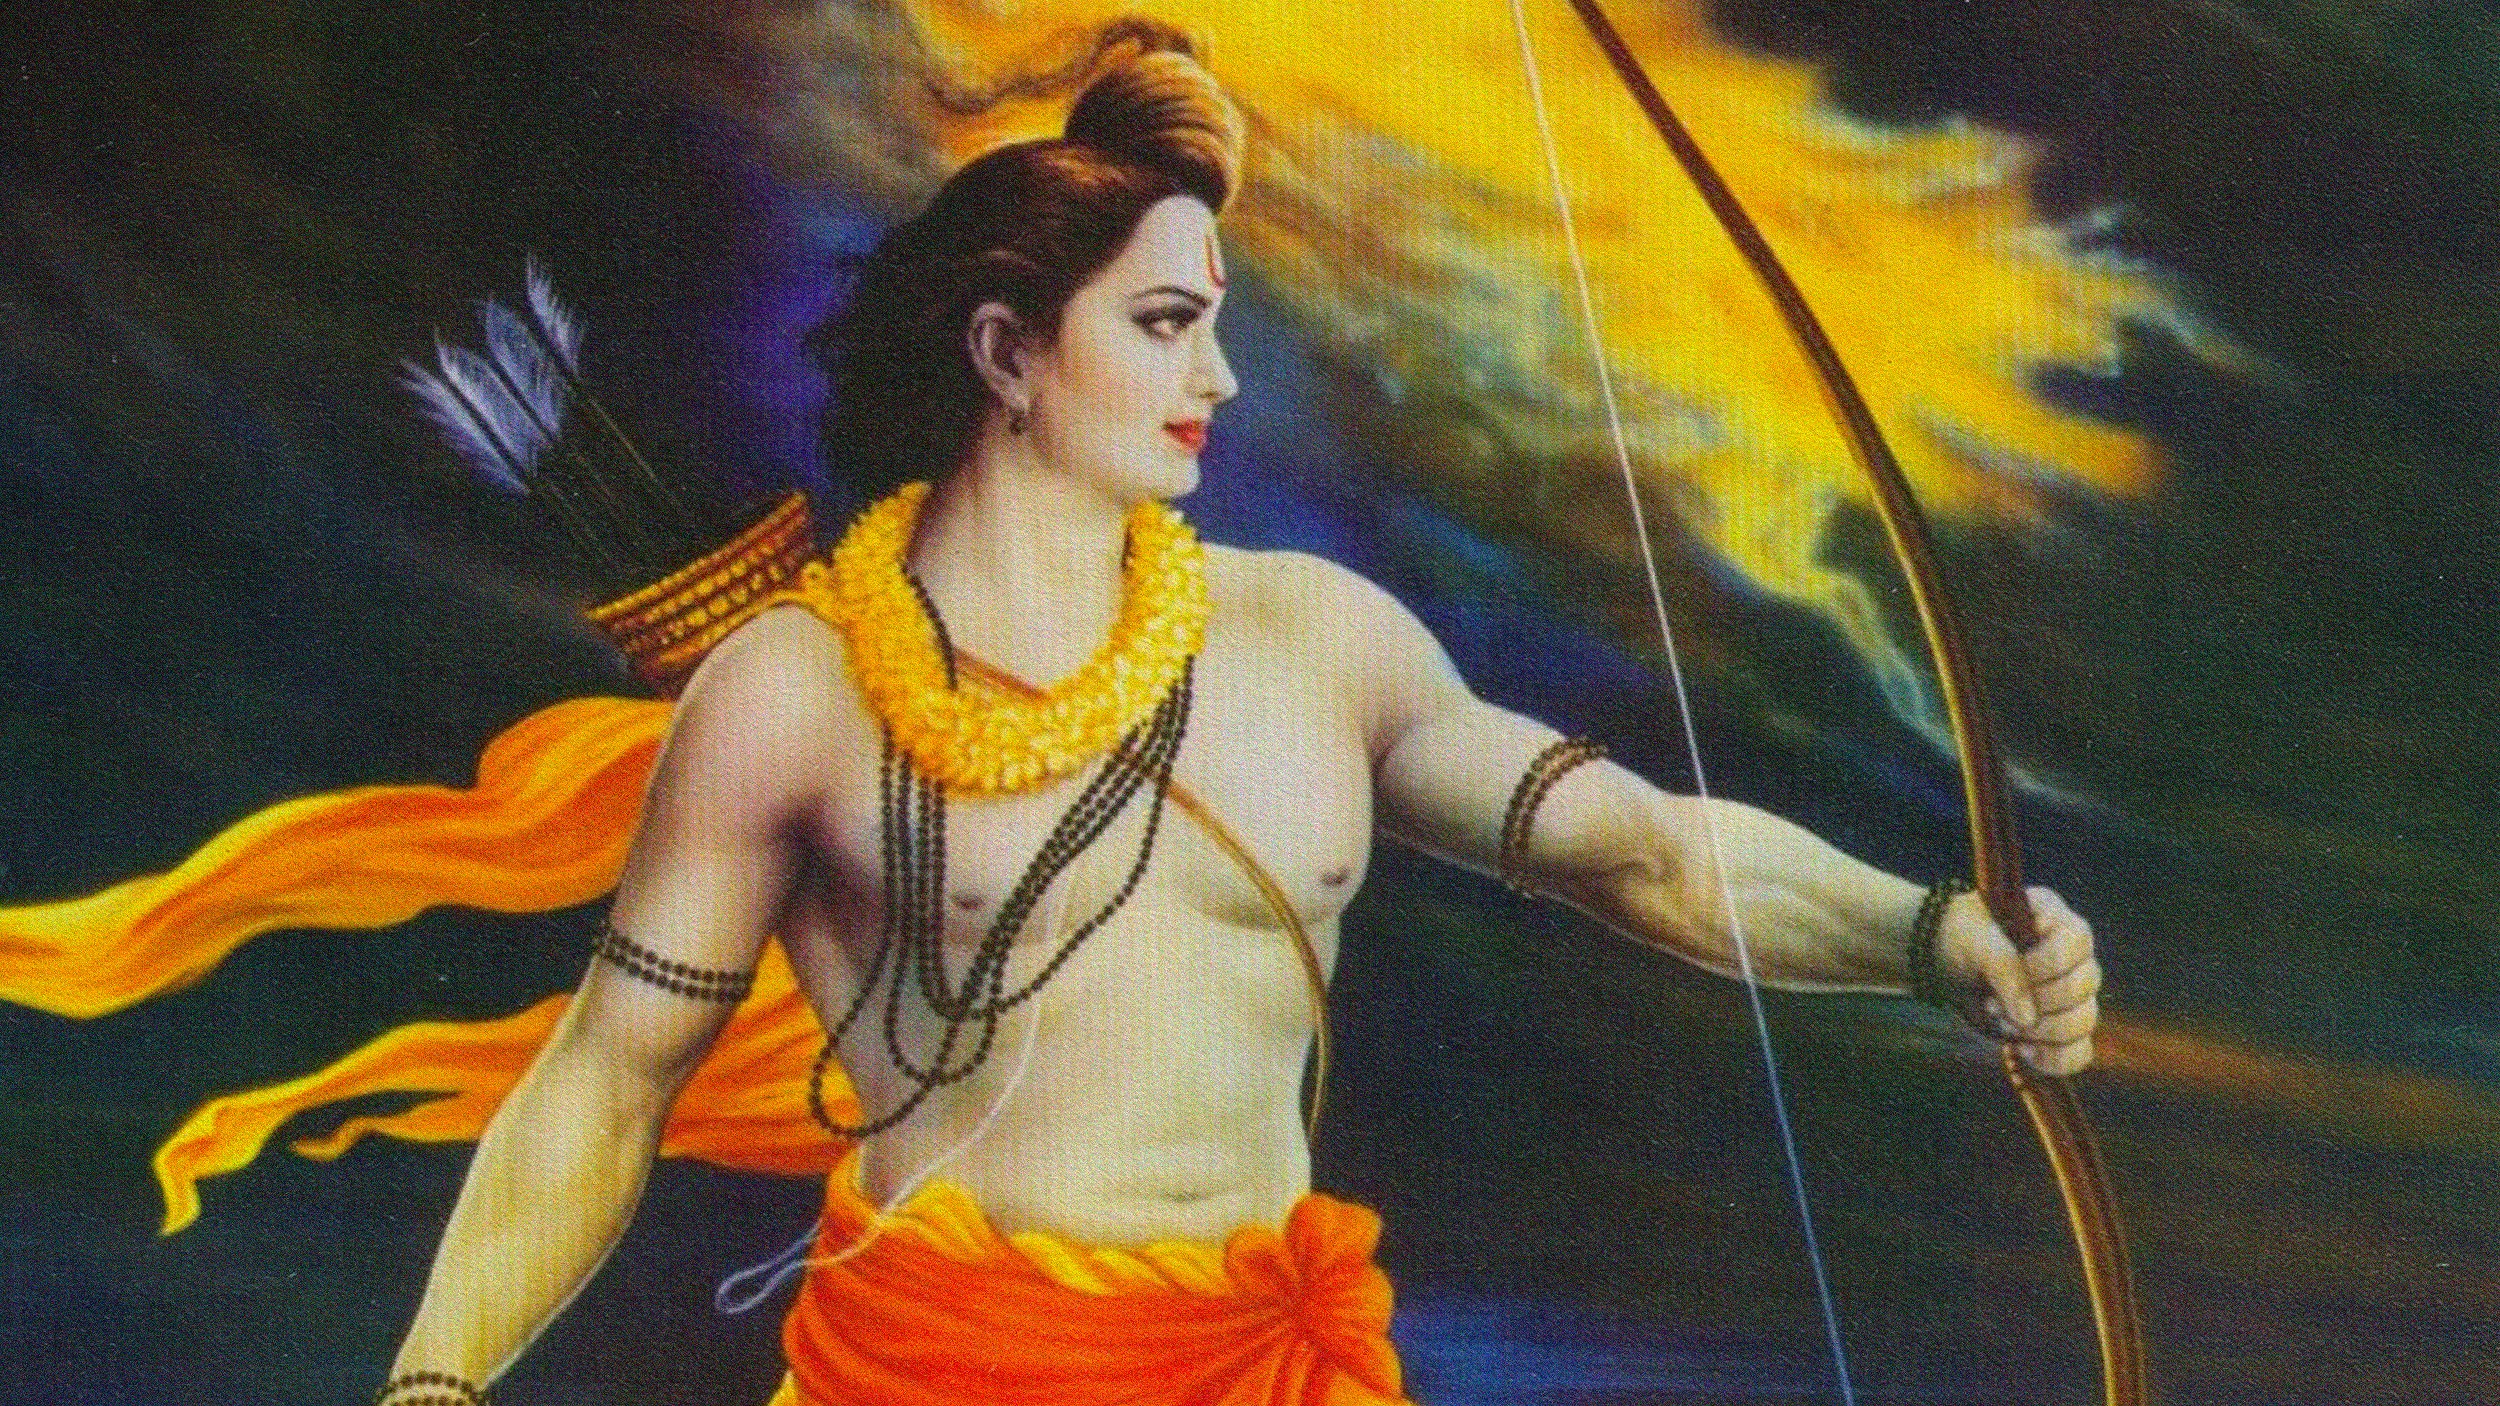 A painting of lord Rama, a major deity in Hinduism and a key figure in the monomyth, depicted with a bow and arrow set against a dynamic sky background.